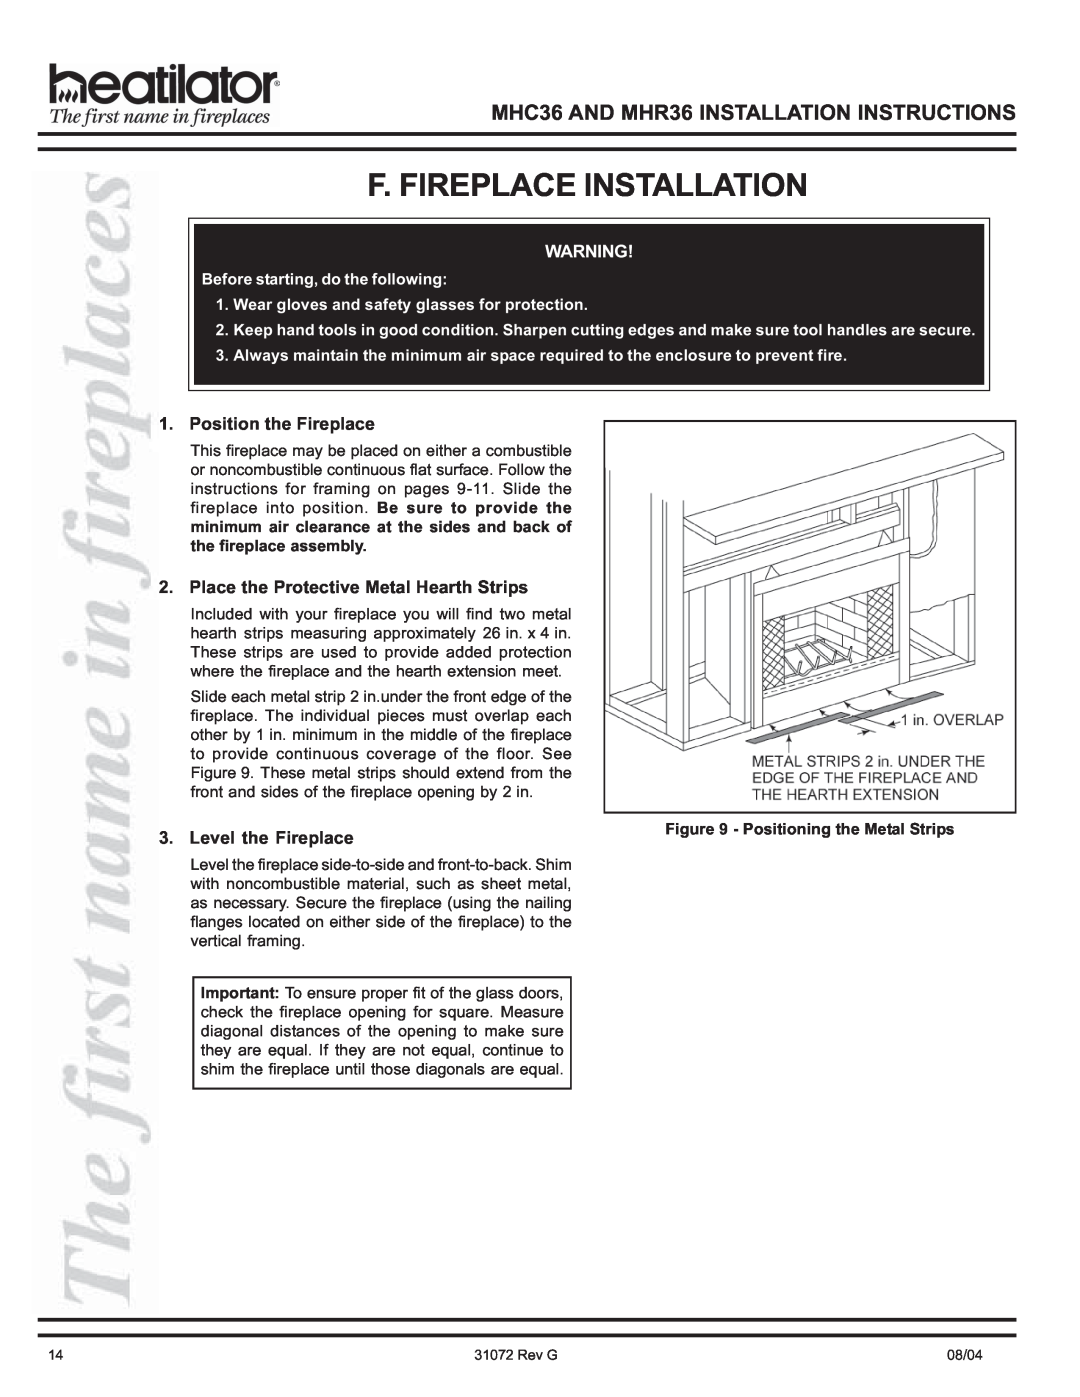 Heart & Home Collectables MHC36, MHR36 manual F. Fireplace Installation, Position the Fireplace, Level the Fireplace 